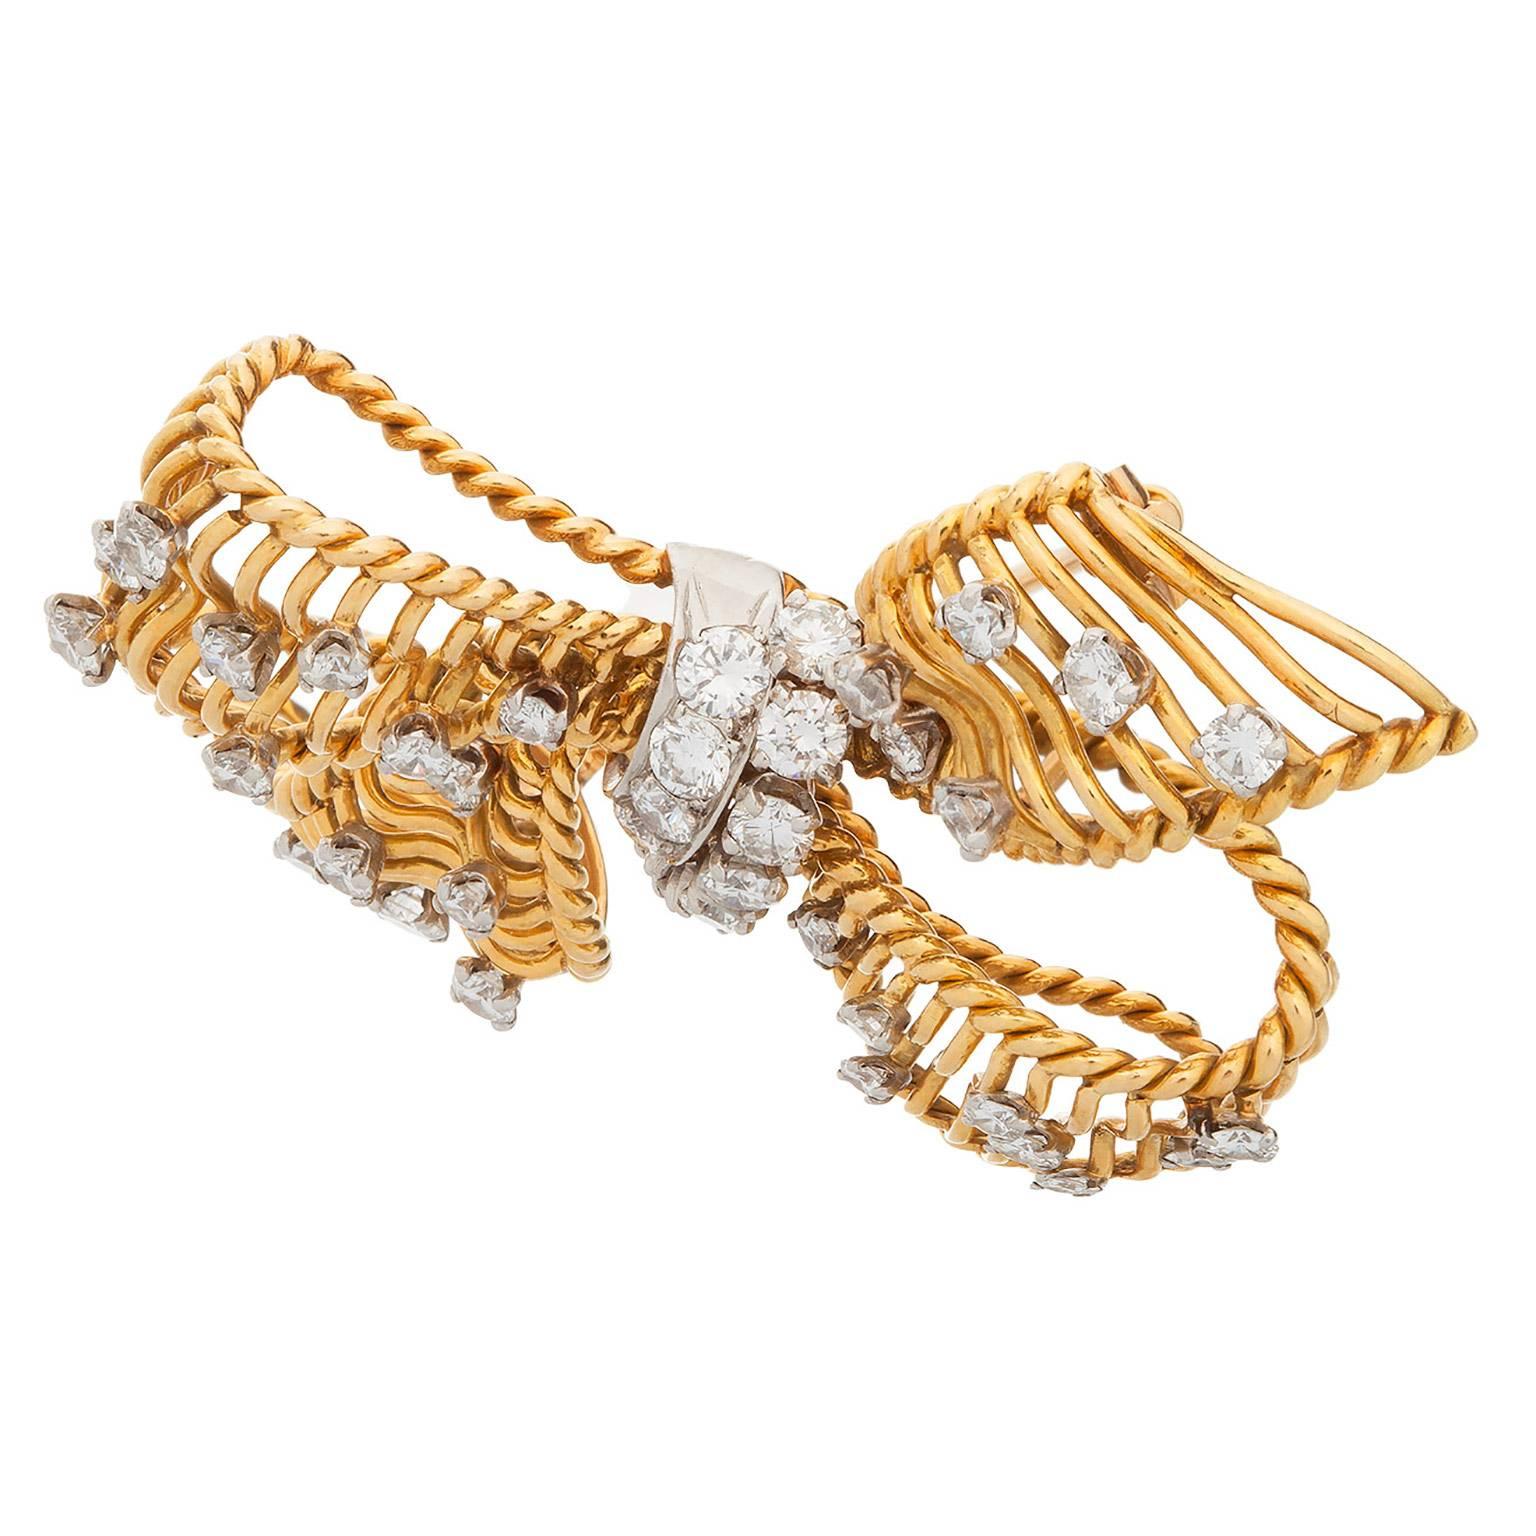 A wonderful diamond bow brooch designed by Bulgari.  The estimated 2.00cts total in round brilliant cut diamonds are set in 18K yellow and white gold, with an open work design.  The diamonds are graded as F-G color, VS clarity.

Signed: 